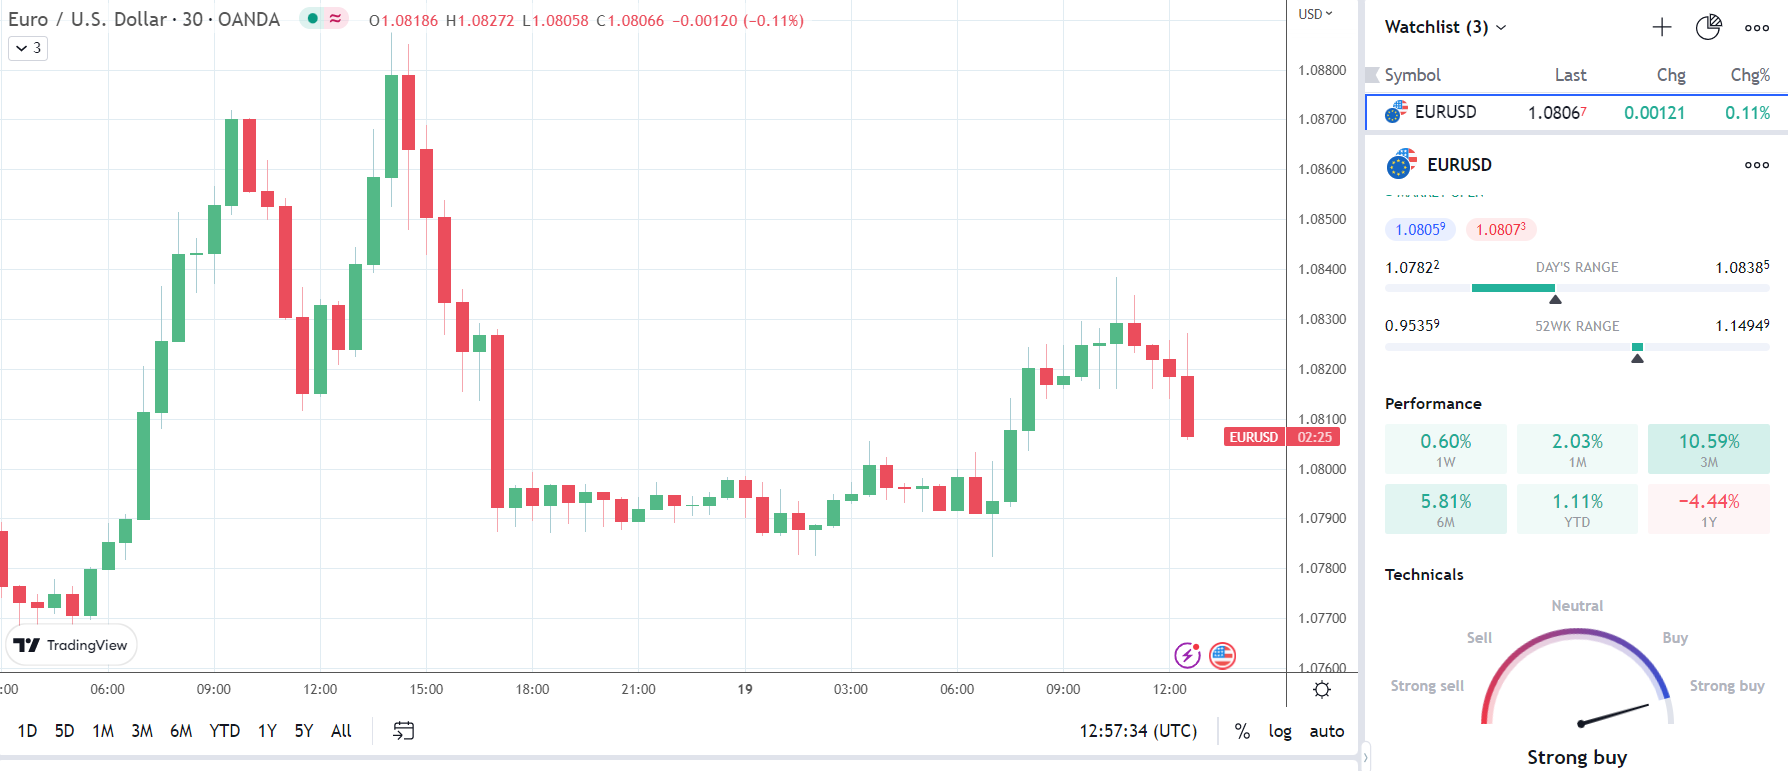 EUR/USD struggles after ECB policy meeting minutes.